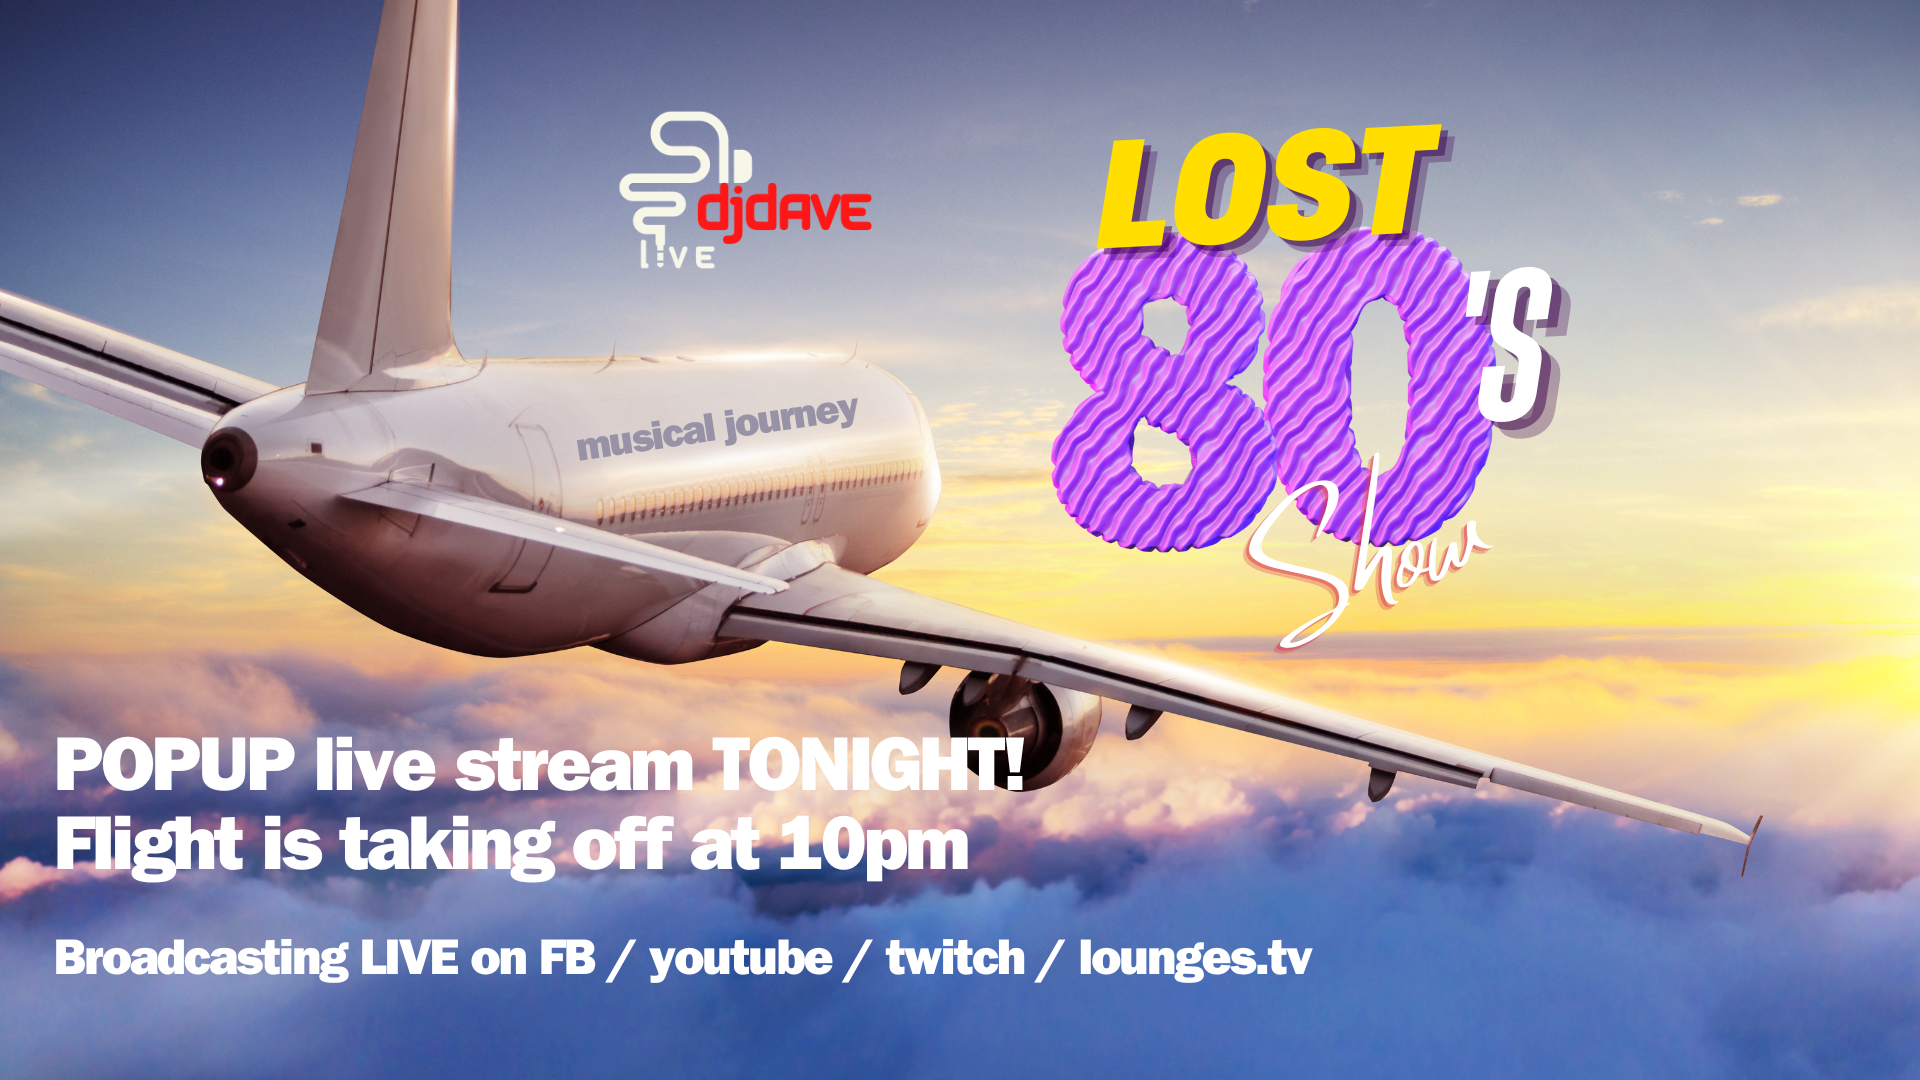 PopUP LIVE STREAM - Lost 80's FLIGHT #010924 - Taking off at 10pm